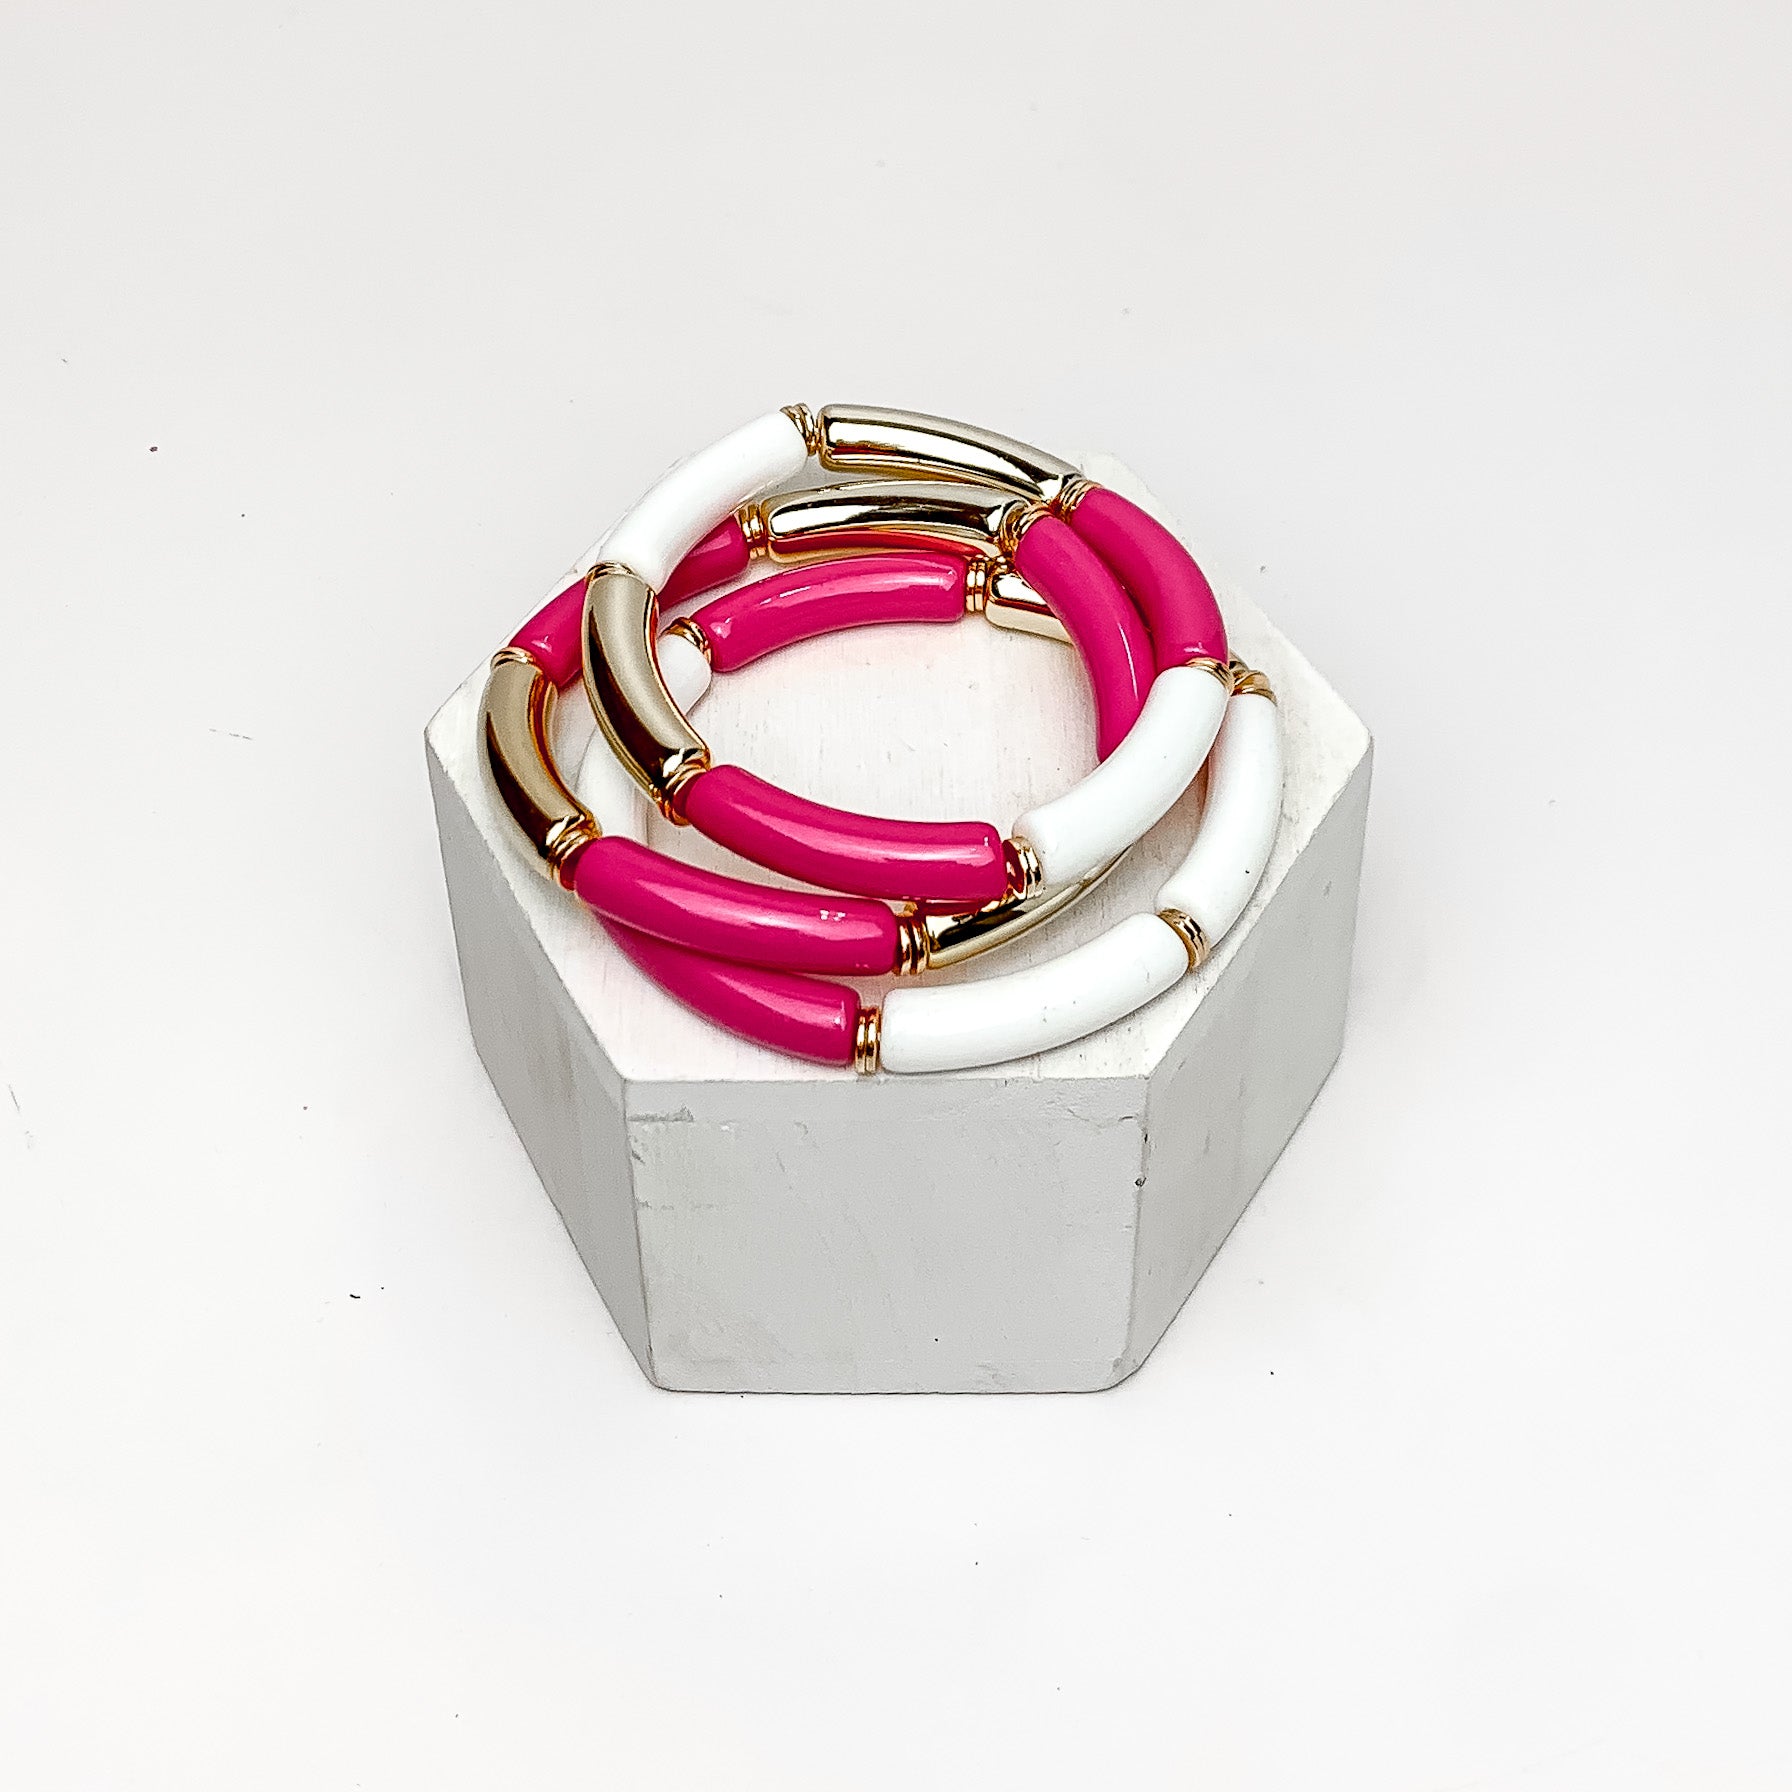 Set of Three | Thin Tube Bracelets in Hot Pink, White, And Gold Tone. Pictured on a white background with the bracelets on a podium.